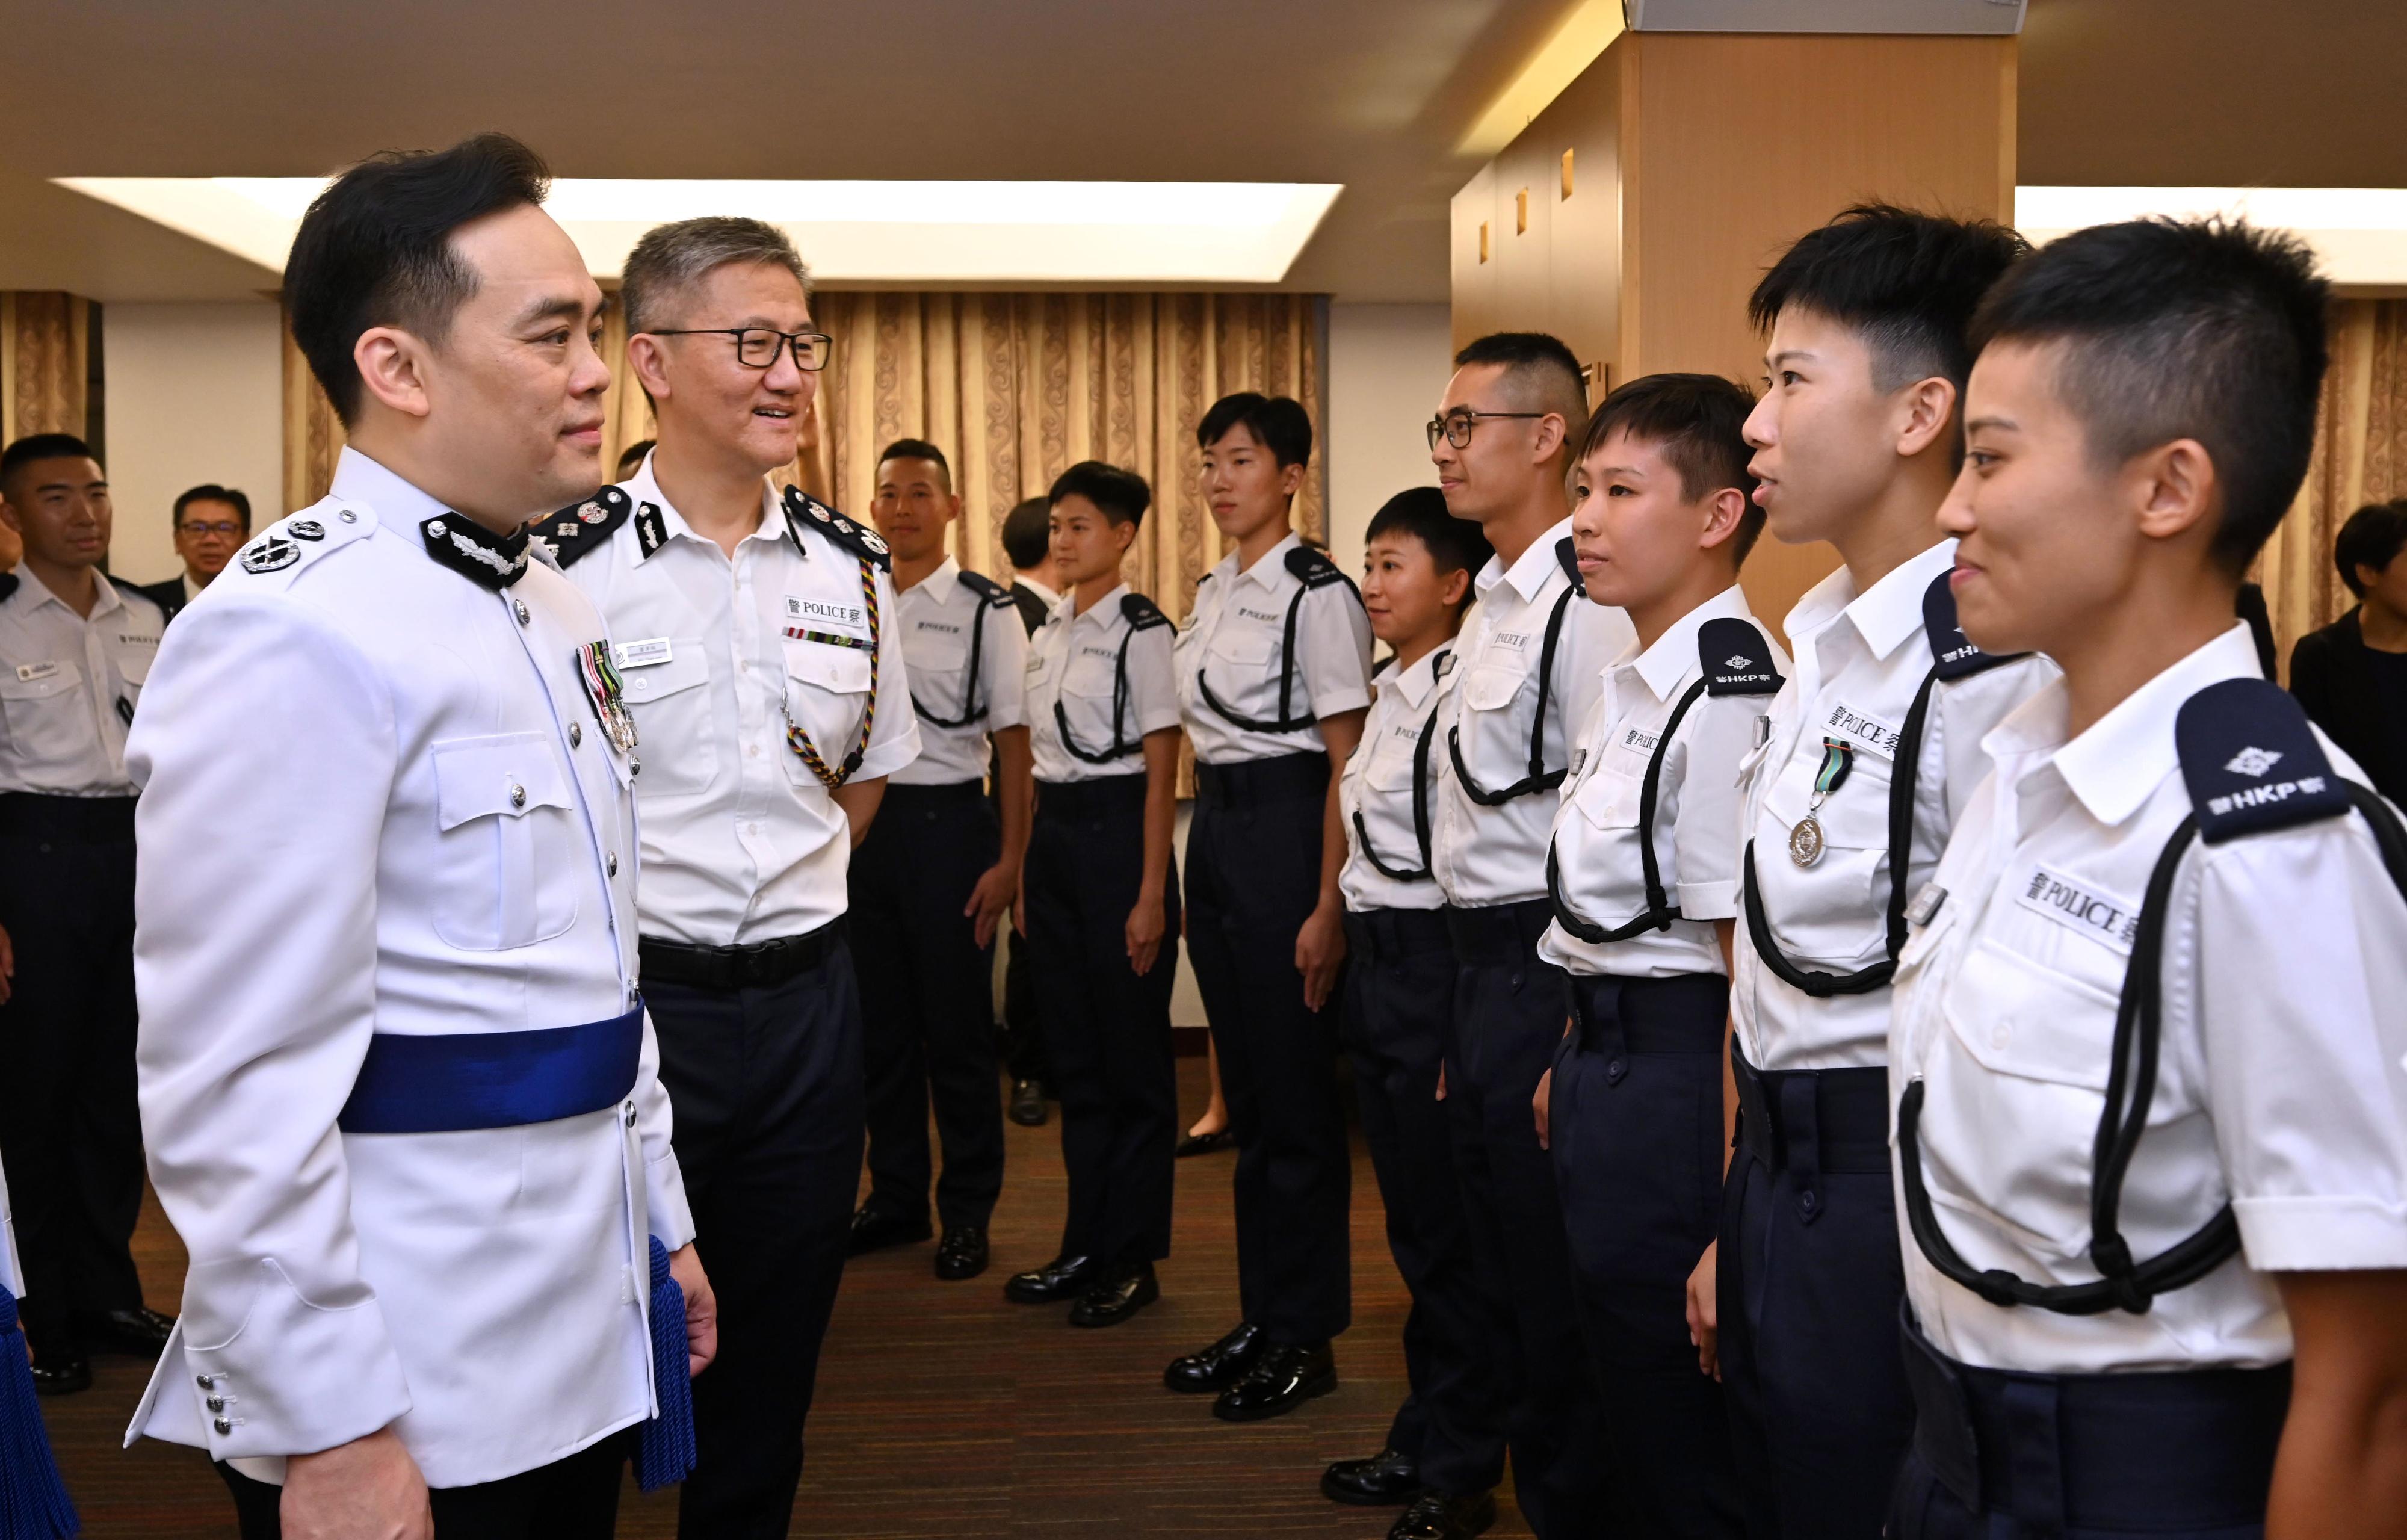 The Commissioner of Police, Mr Siu Chak-yee (second left) and the Deputy Commissioner of Police (Operations), Mr Yuen Yuk-kin (first left), congratulate the probationary inspectors after the passing-out parade held at the Hong Kong Police College today (June 24).